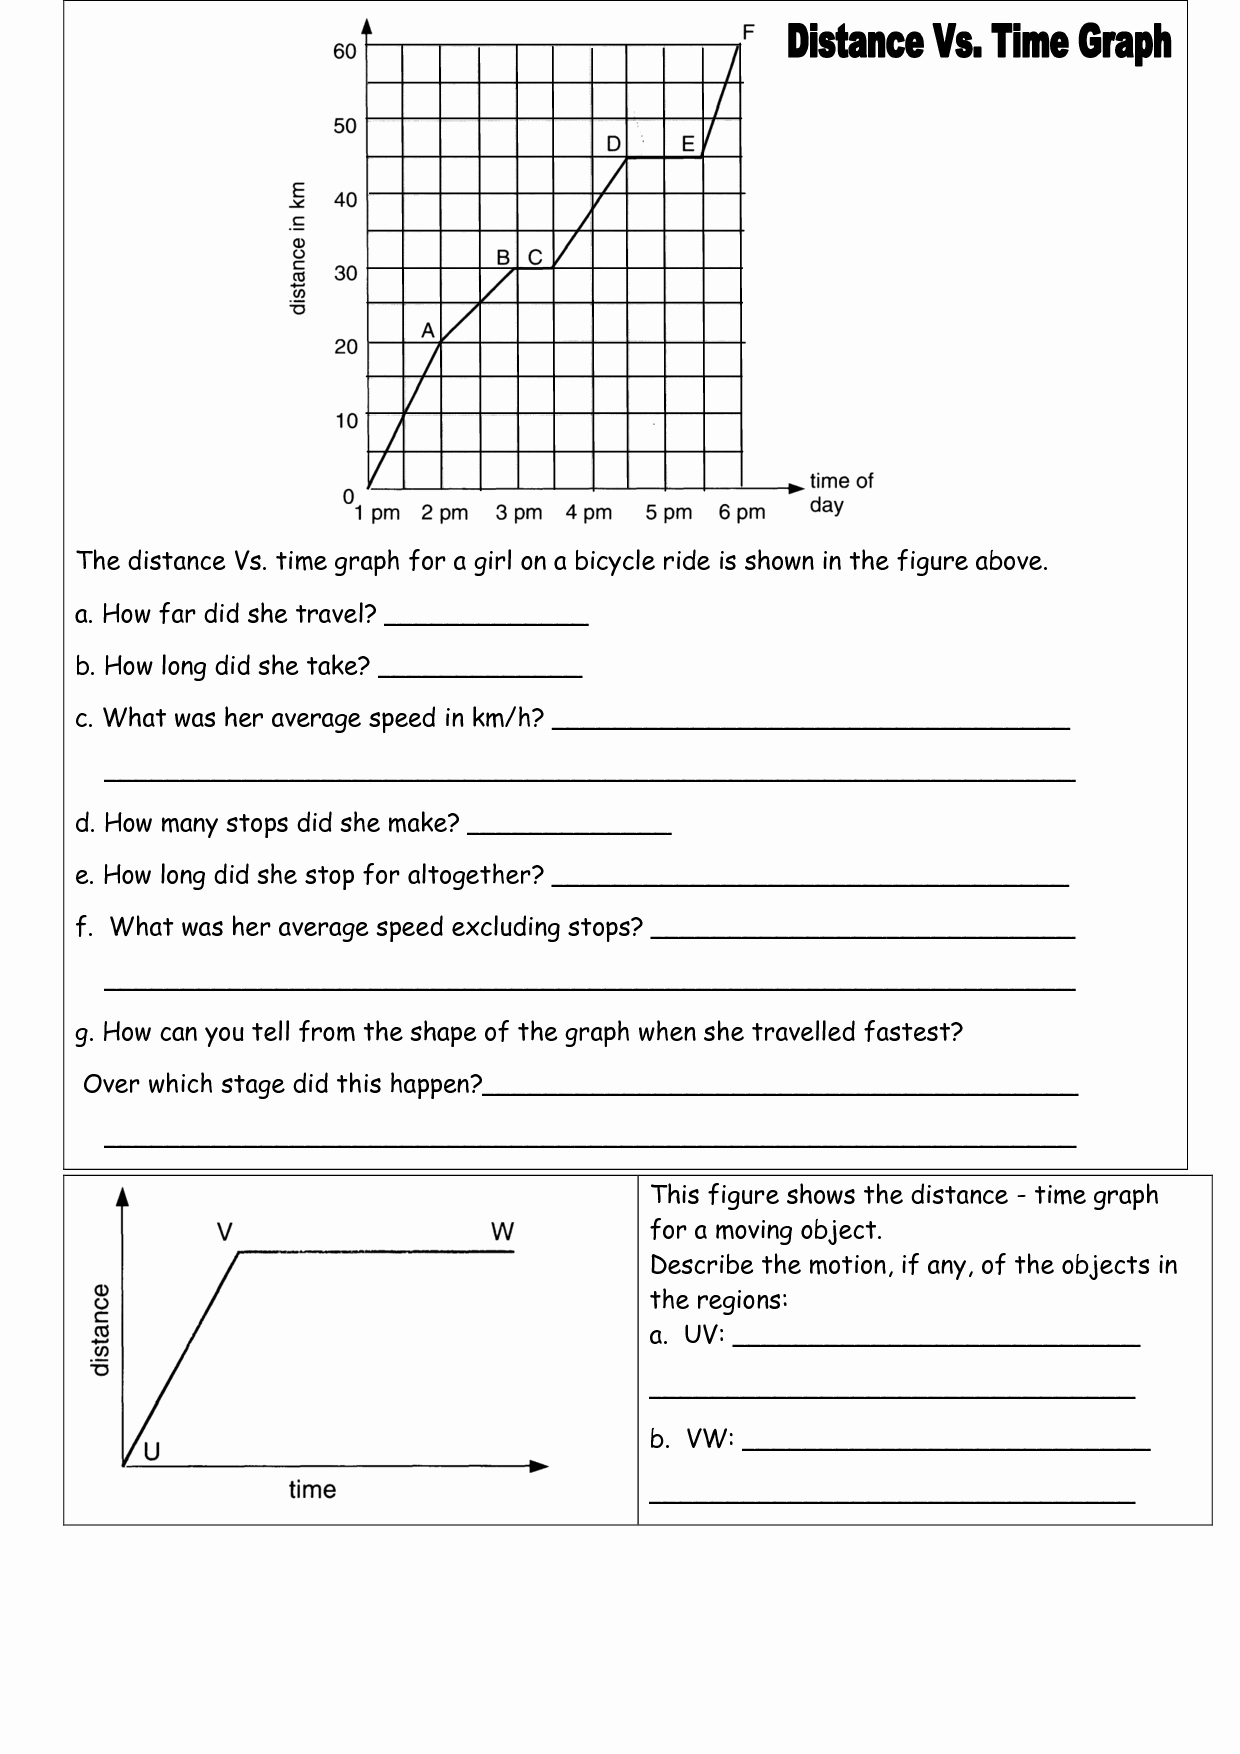 Velocity Time Graph Worksheet Awesome Velocity Time Graph Worksheet